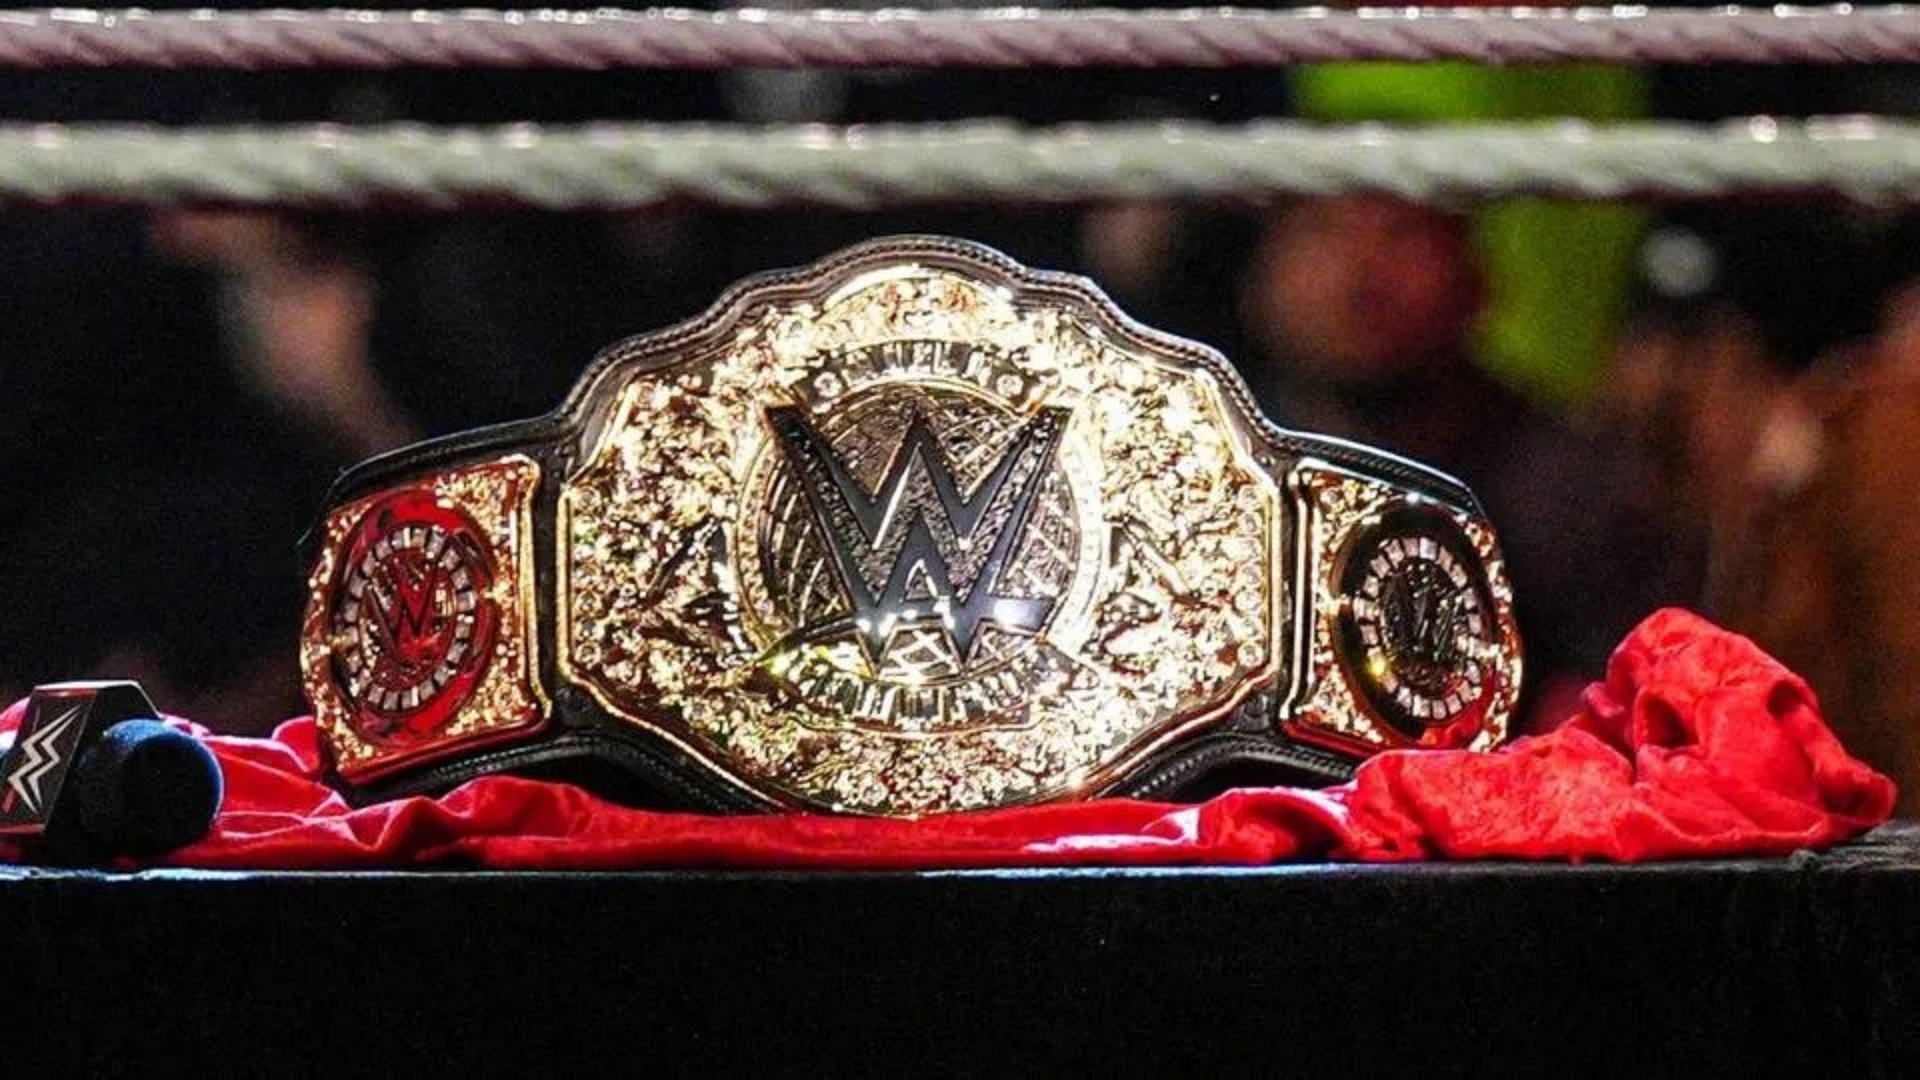 The WWE World Heavyweight Champion is one of the most iconic titles of the promotion